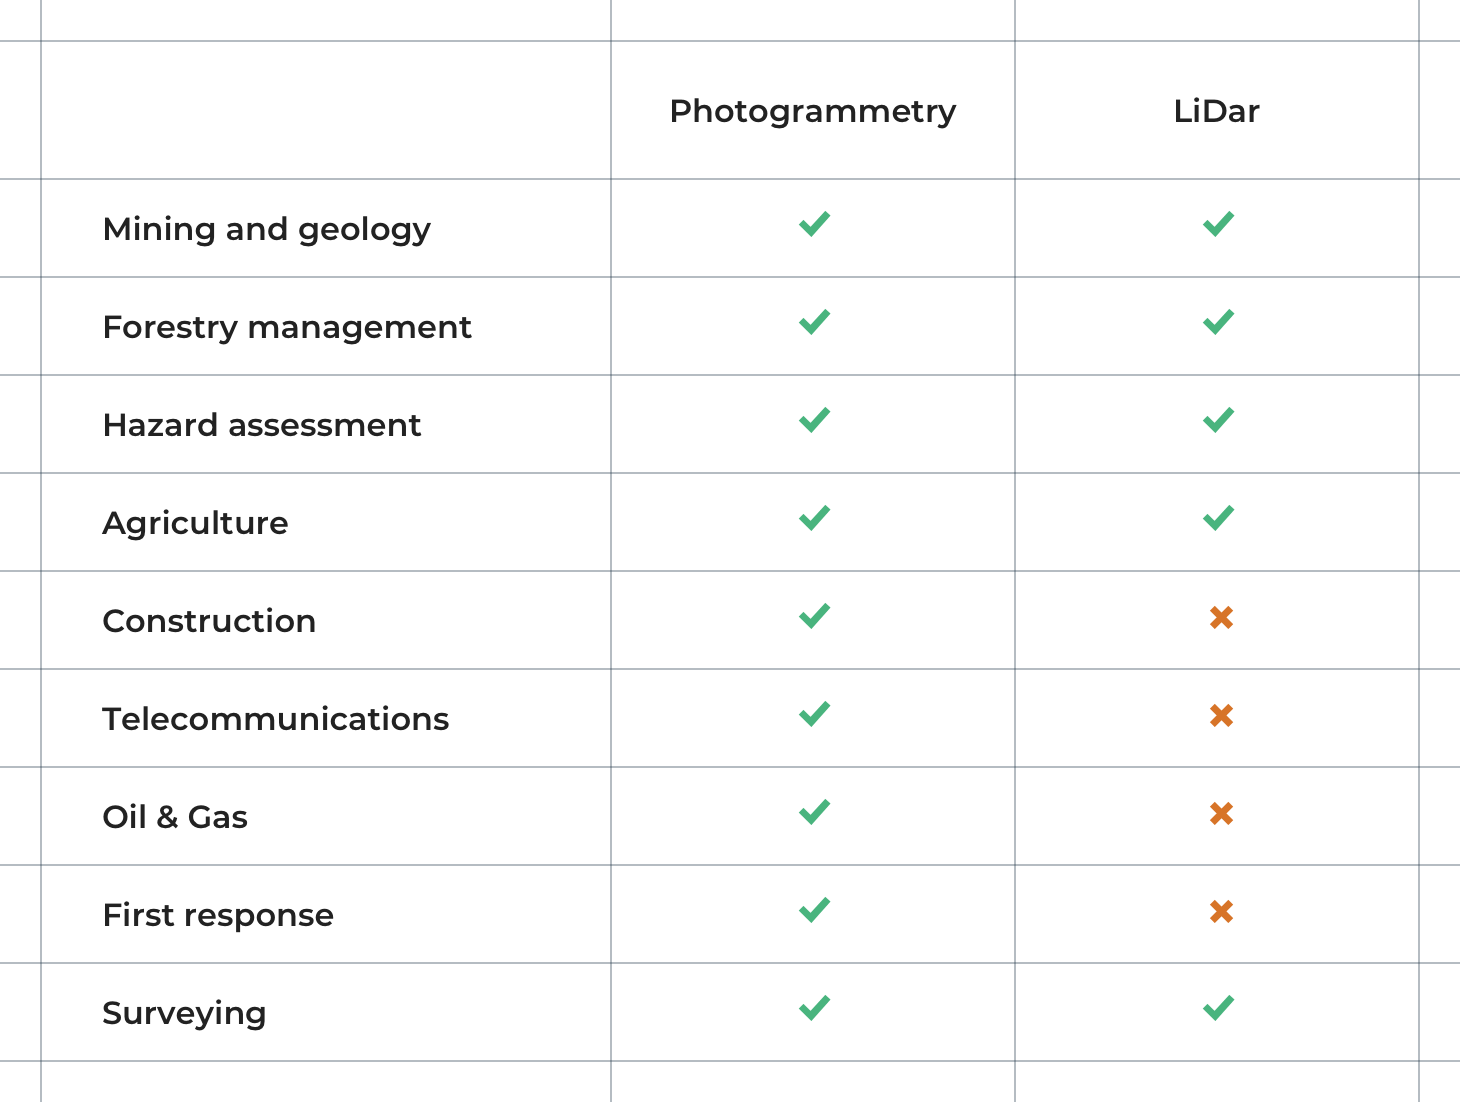 Table comparing popular use cases for LiDAR and Photogrammetry